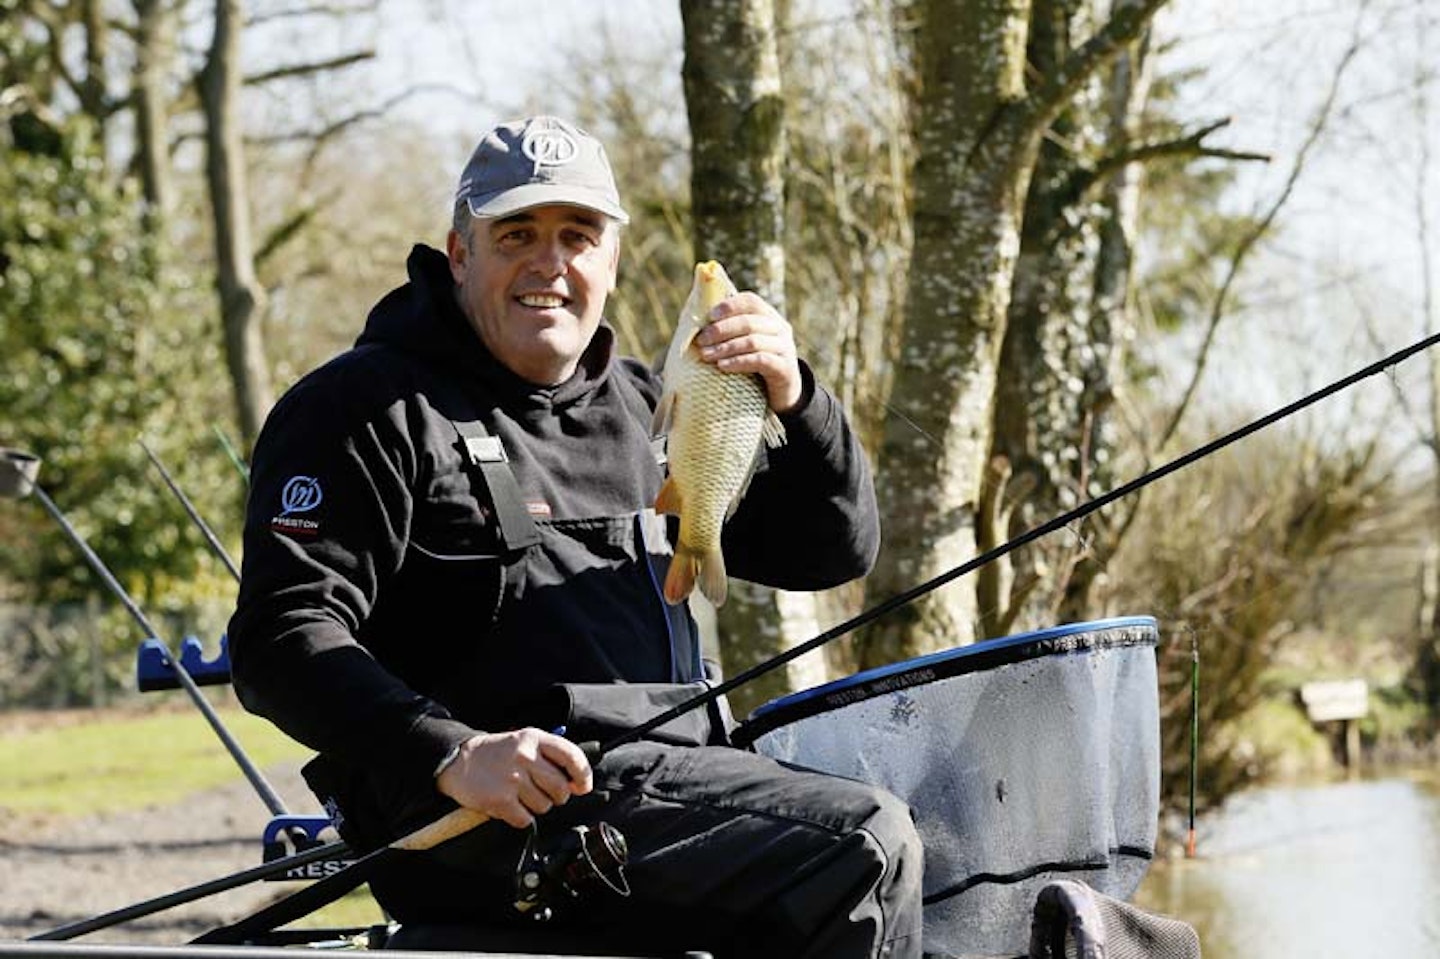 CARP FISHING TIPS, 10 TRICKS TO HELP YOU CATCH CARP ON THE FLOAT